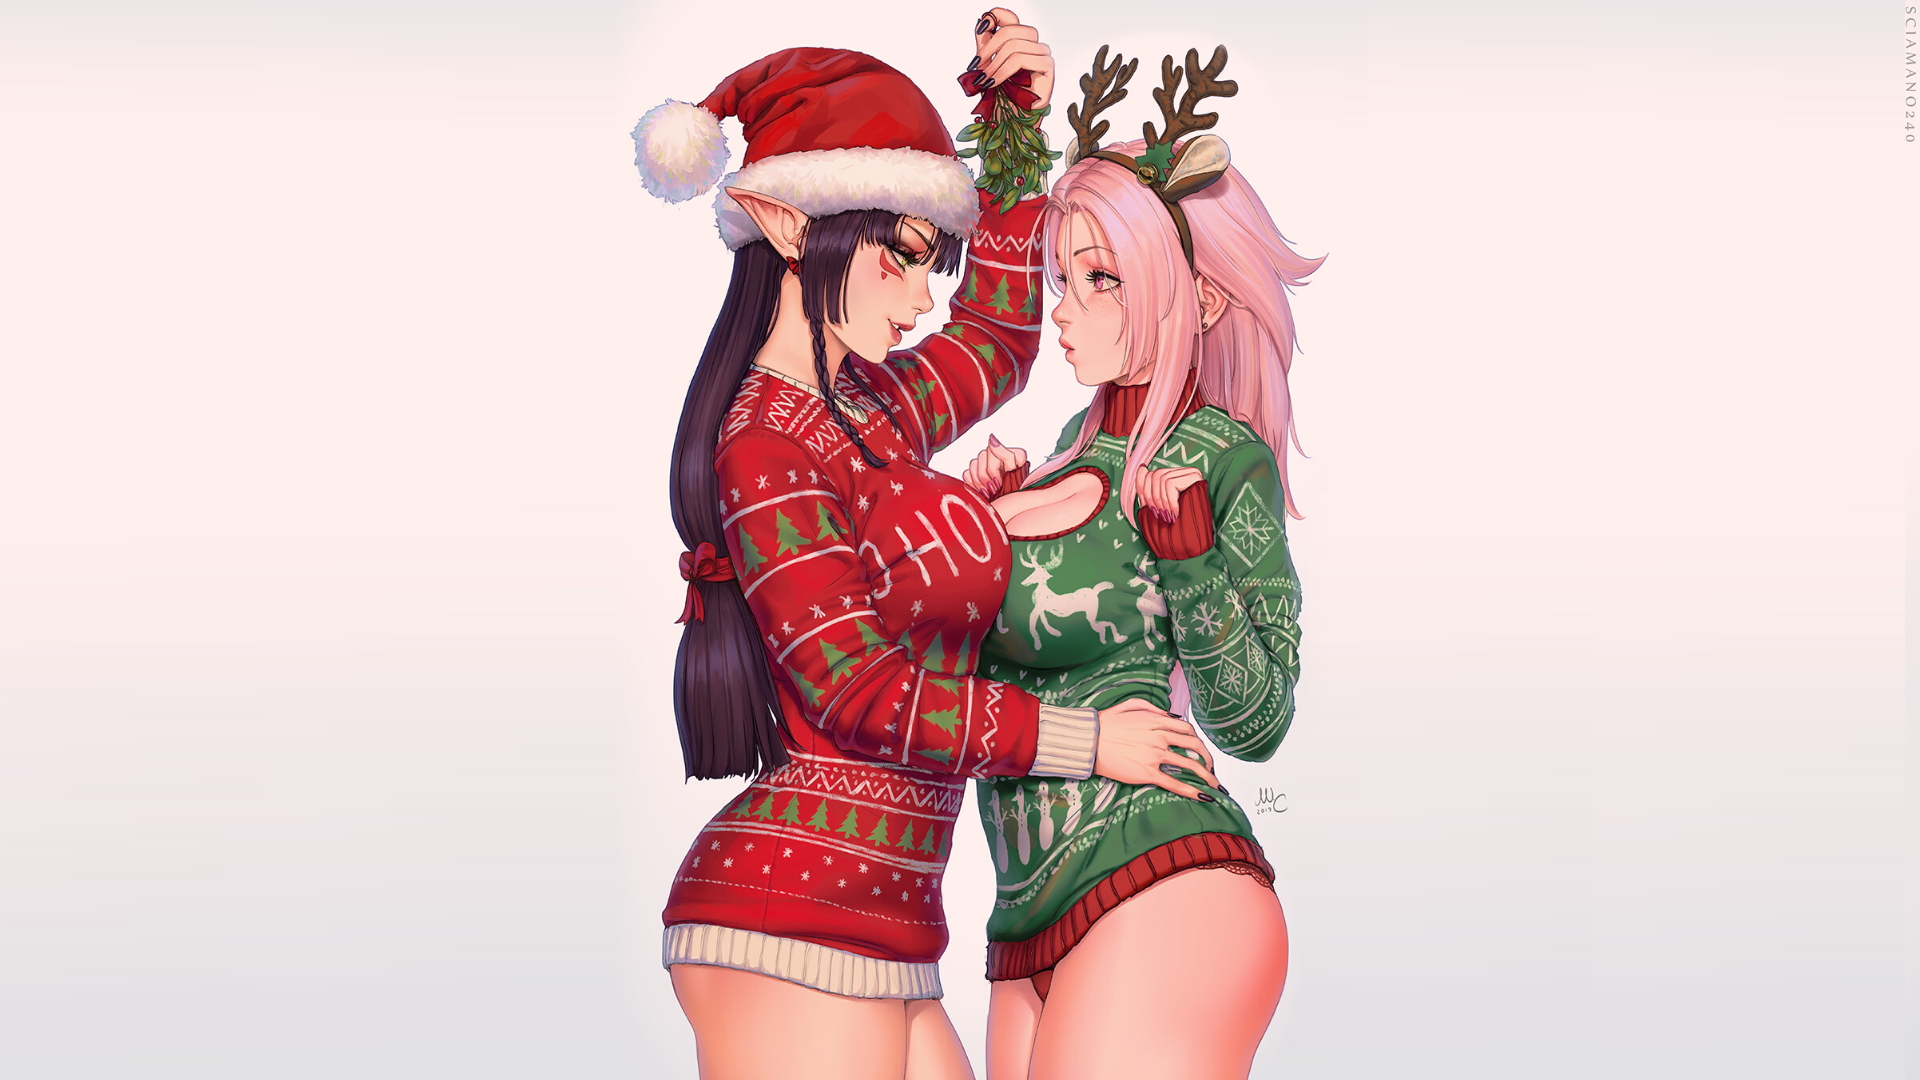 Anime 1920x1080 women digital art short hair simple background two women pink hair sensual gaze Christmas big boobs cleavage face to face hands on hips Santa hats smiling gray background artwork boobs on boobs thighs pointy ears Mirco Cabbia